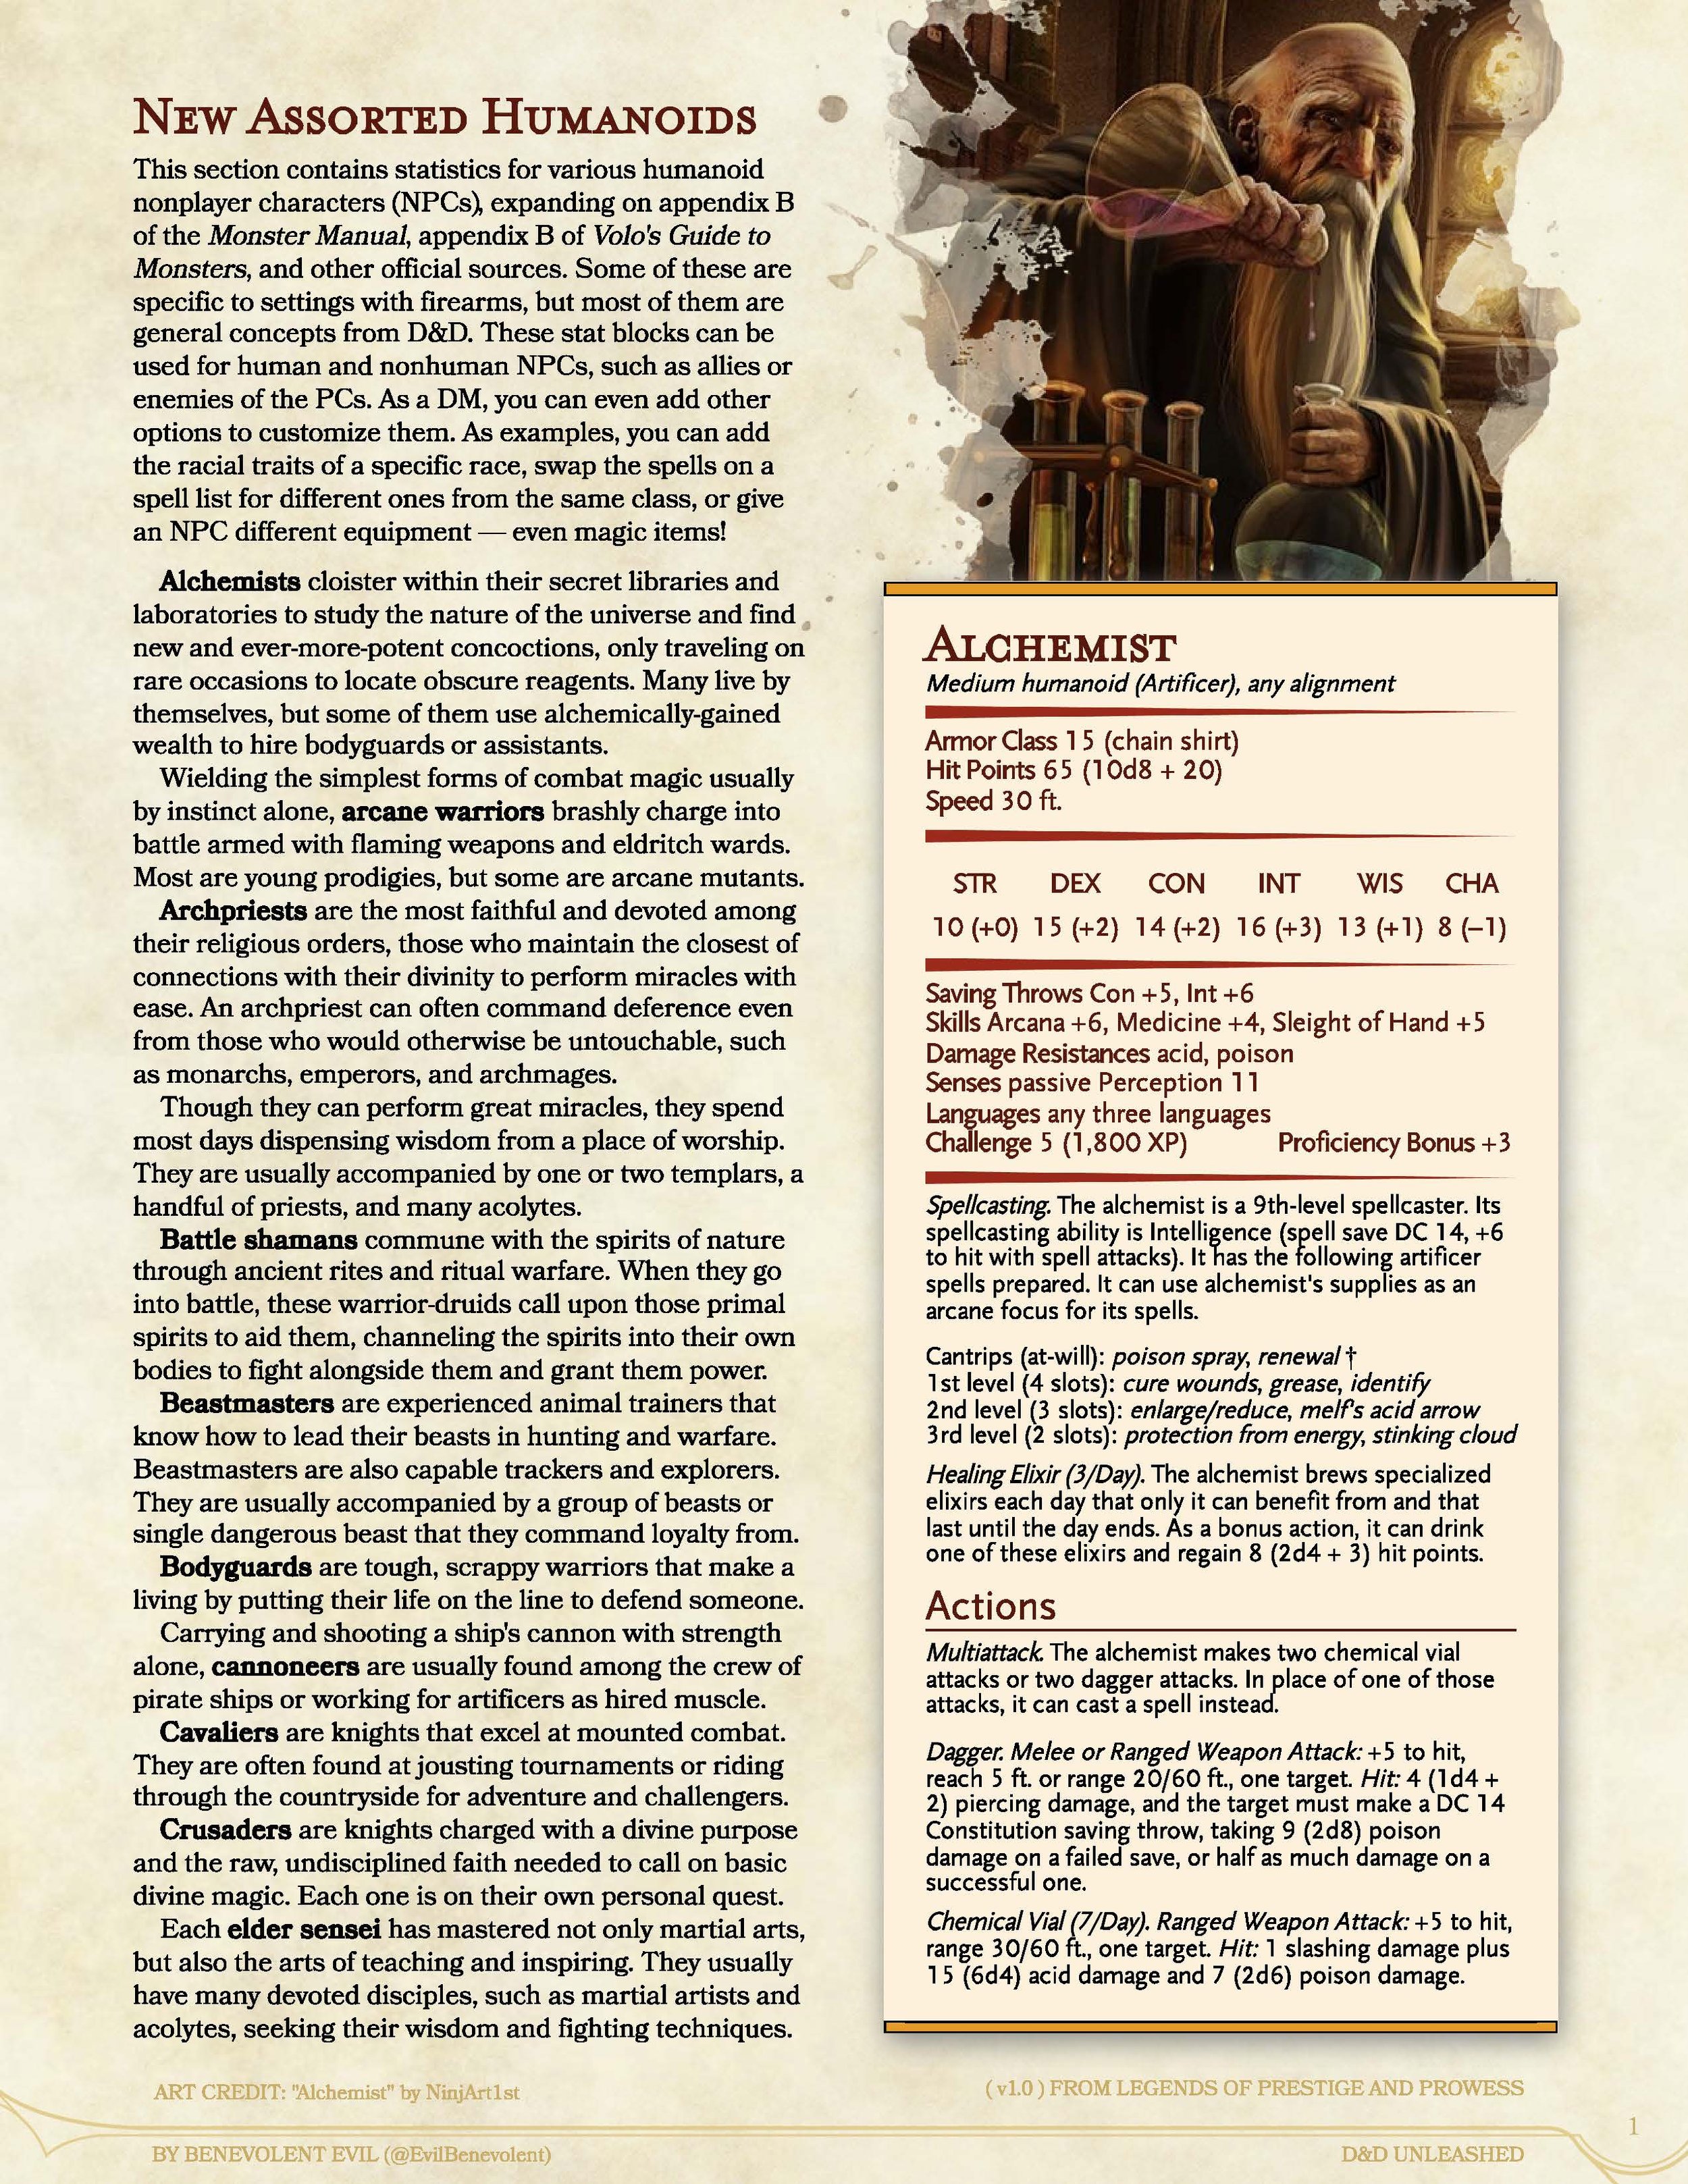 D&D Unleashed - Assorted Humanoid NPCs (v1_0)_Page_01.jpg